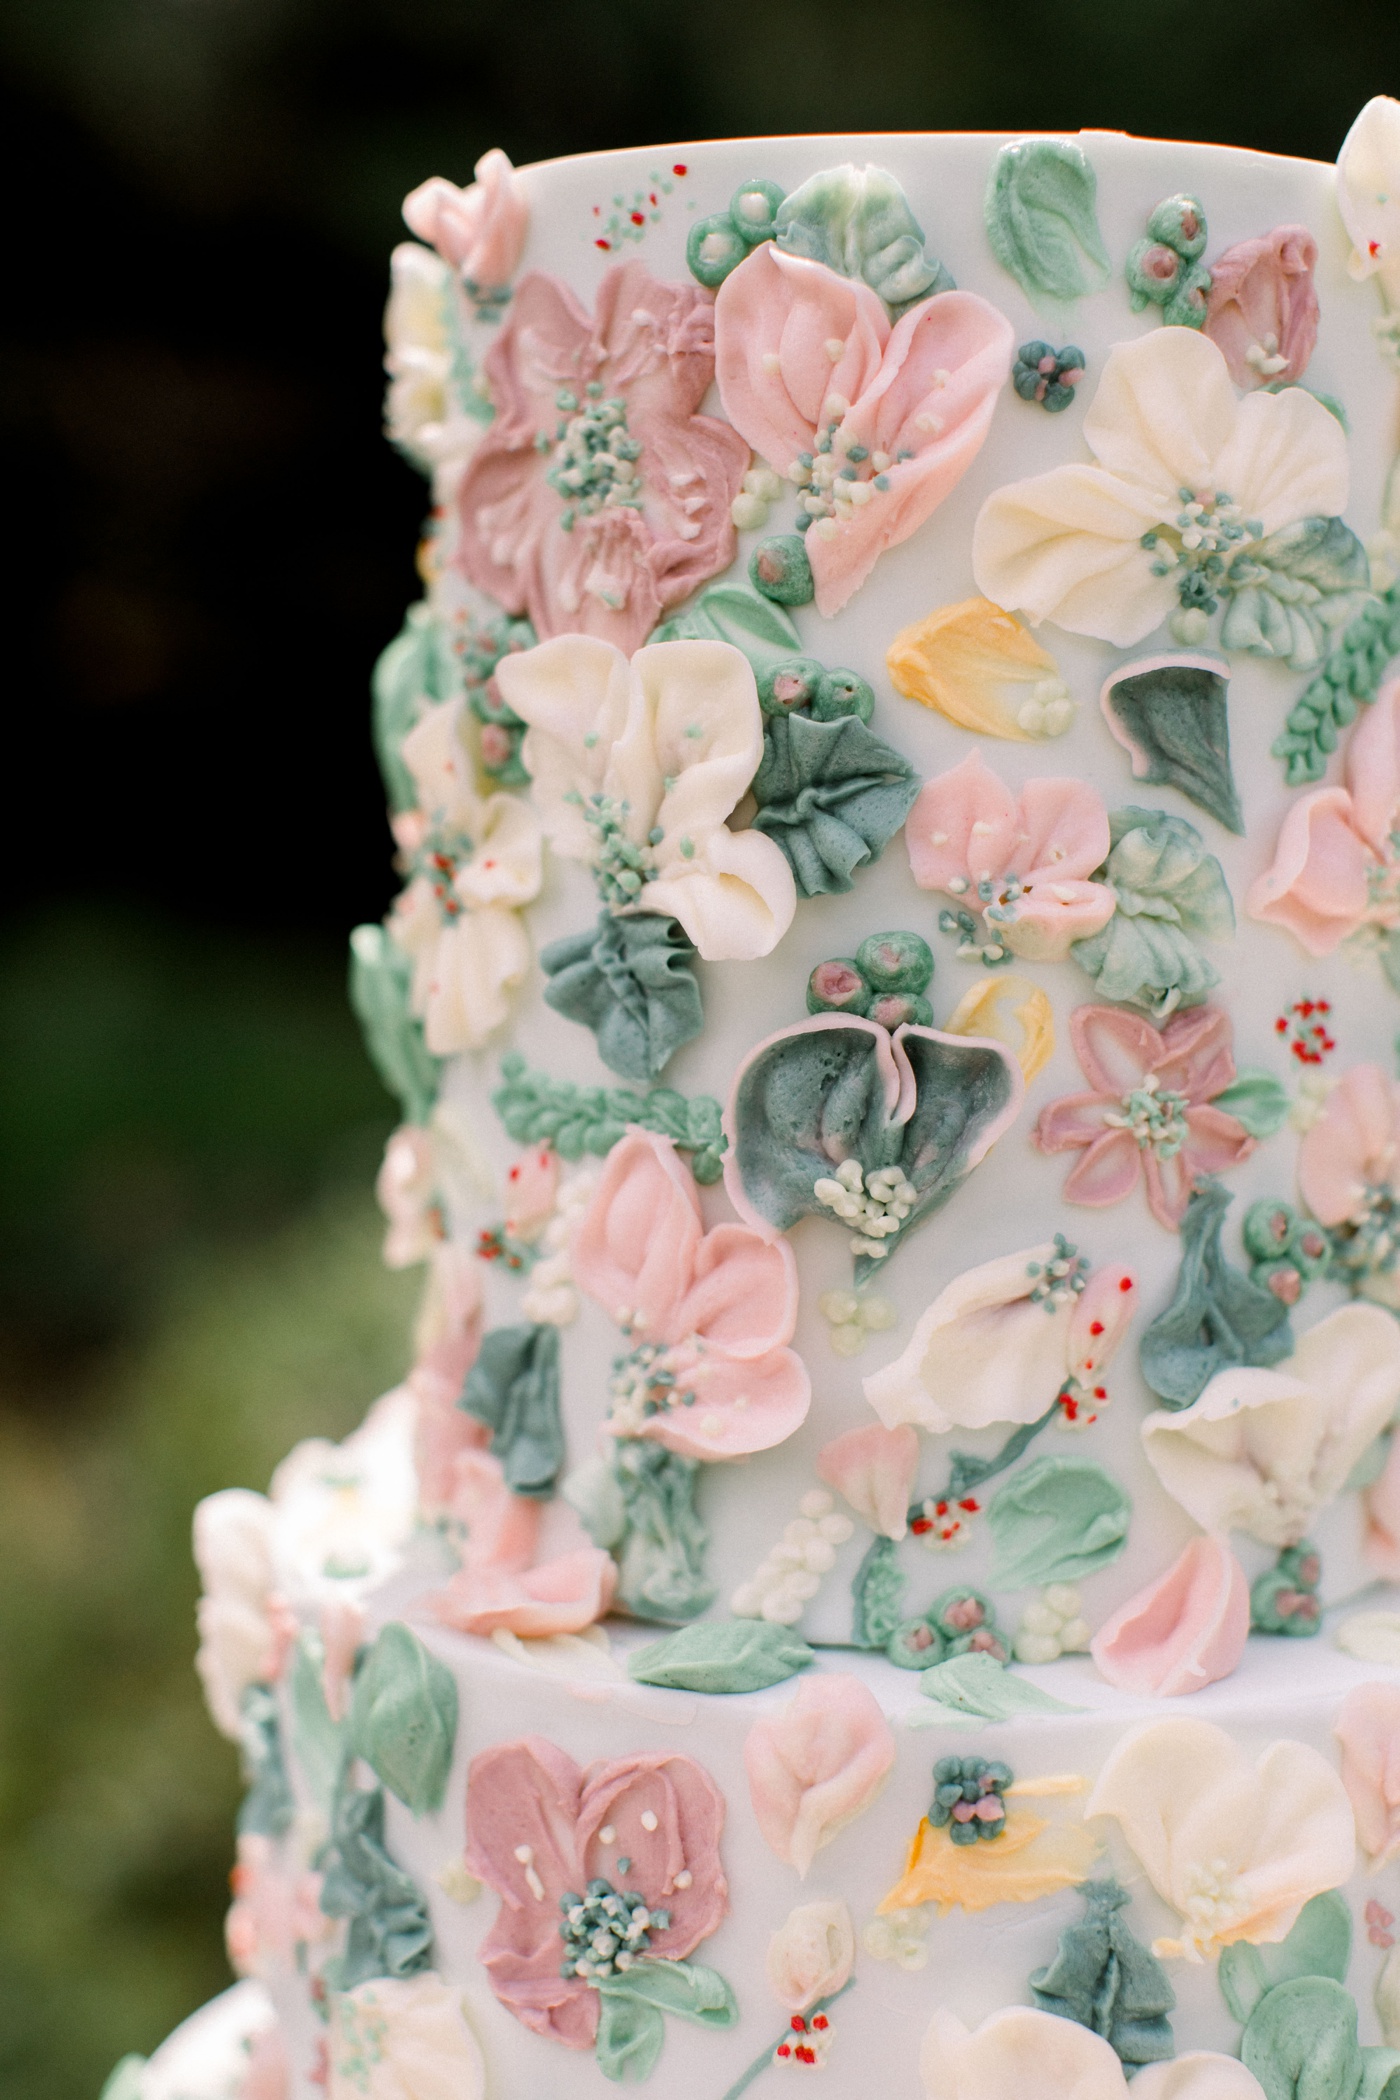 Four-tier wedding cake with frosted pink and green flowers by Eat More Cake